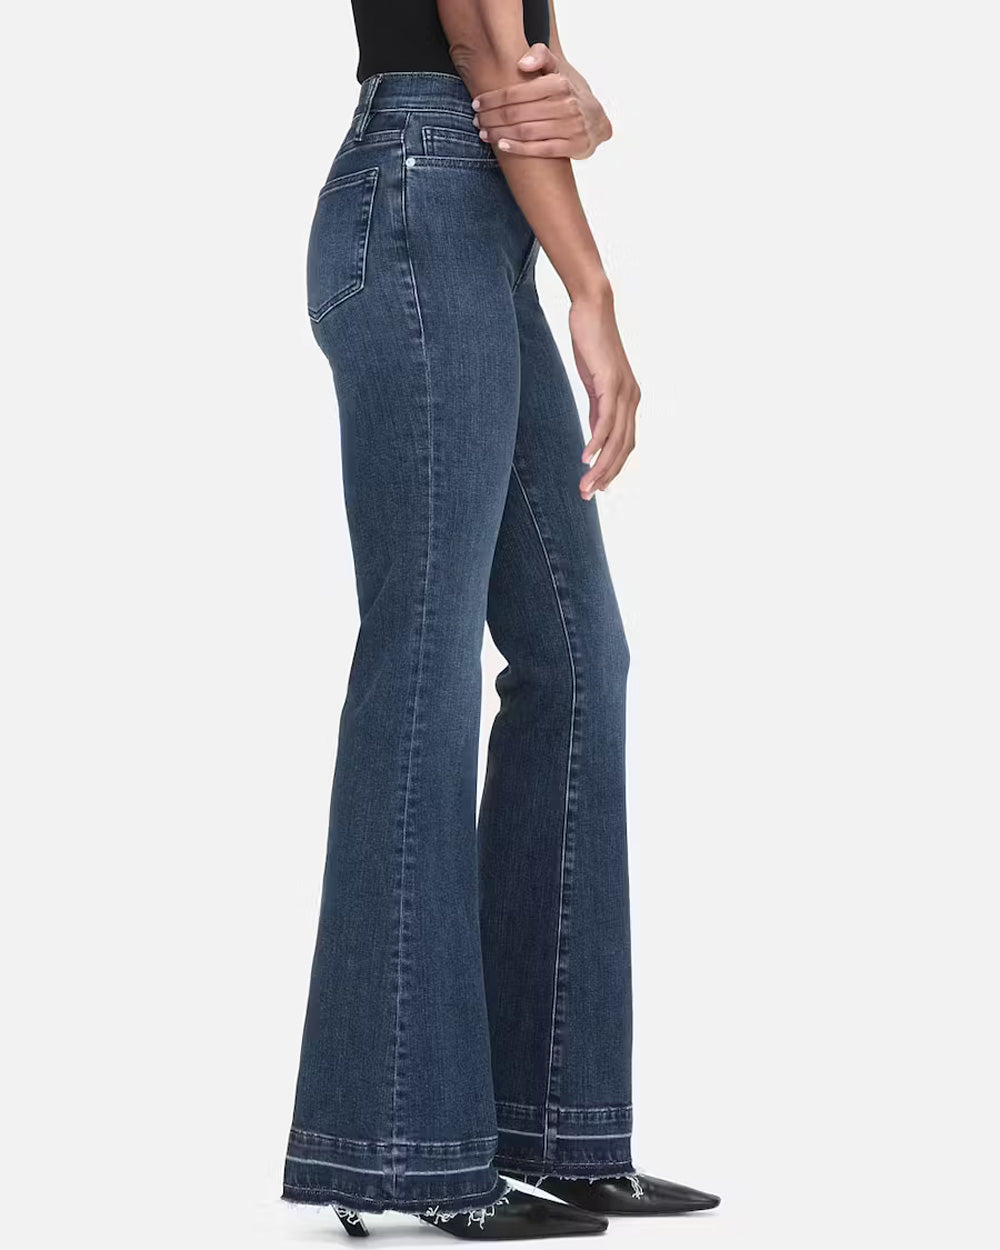 Le Easy Flare Jean in Thunderstorm